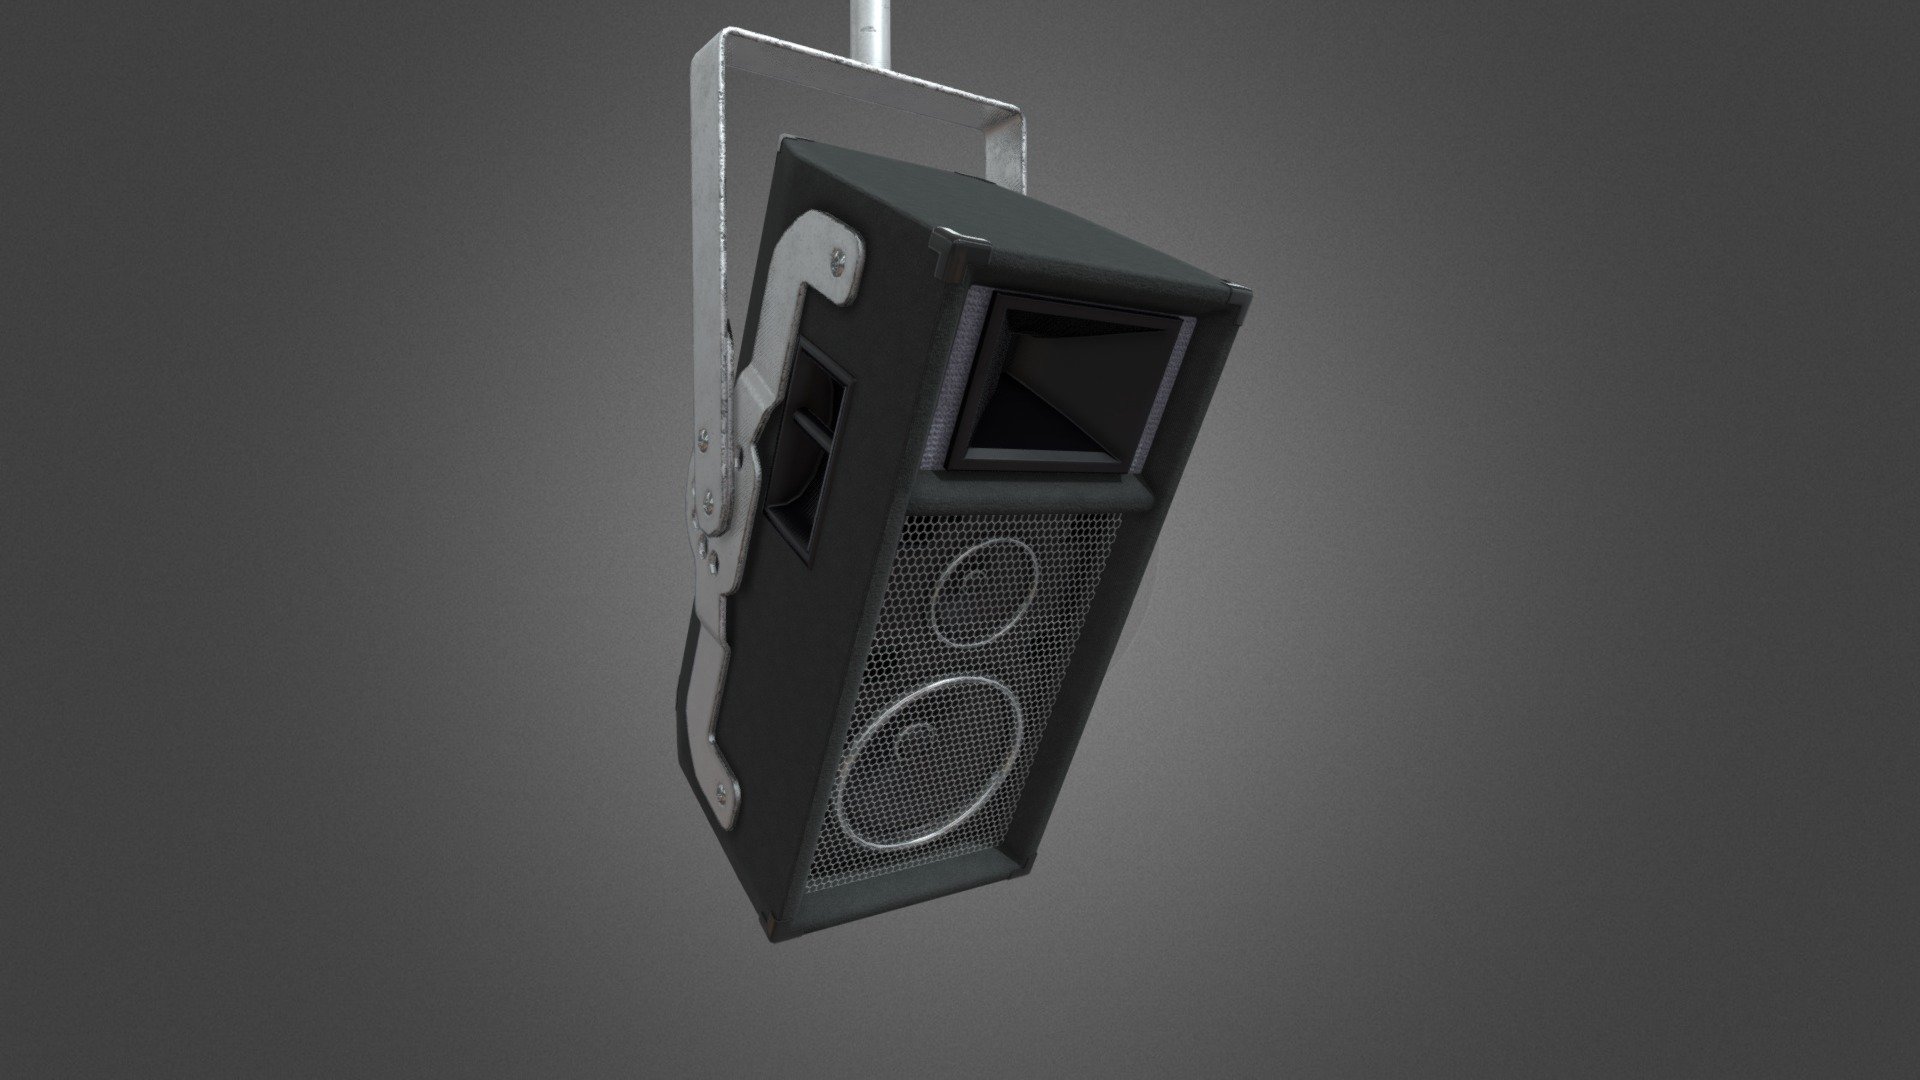 A professional speaker for use on big and small stages.
The speaker can be angled to different degrees thanks to the mounted bracket.
2048x2048 textures,
15519 faces 3d model